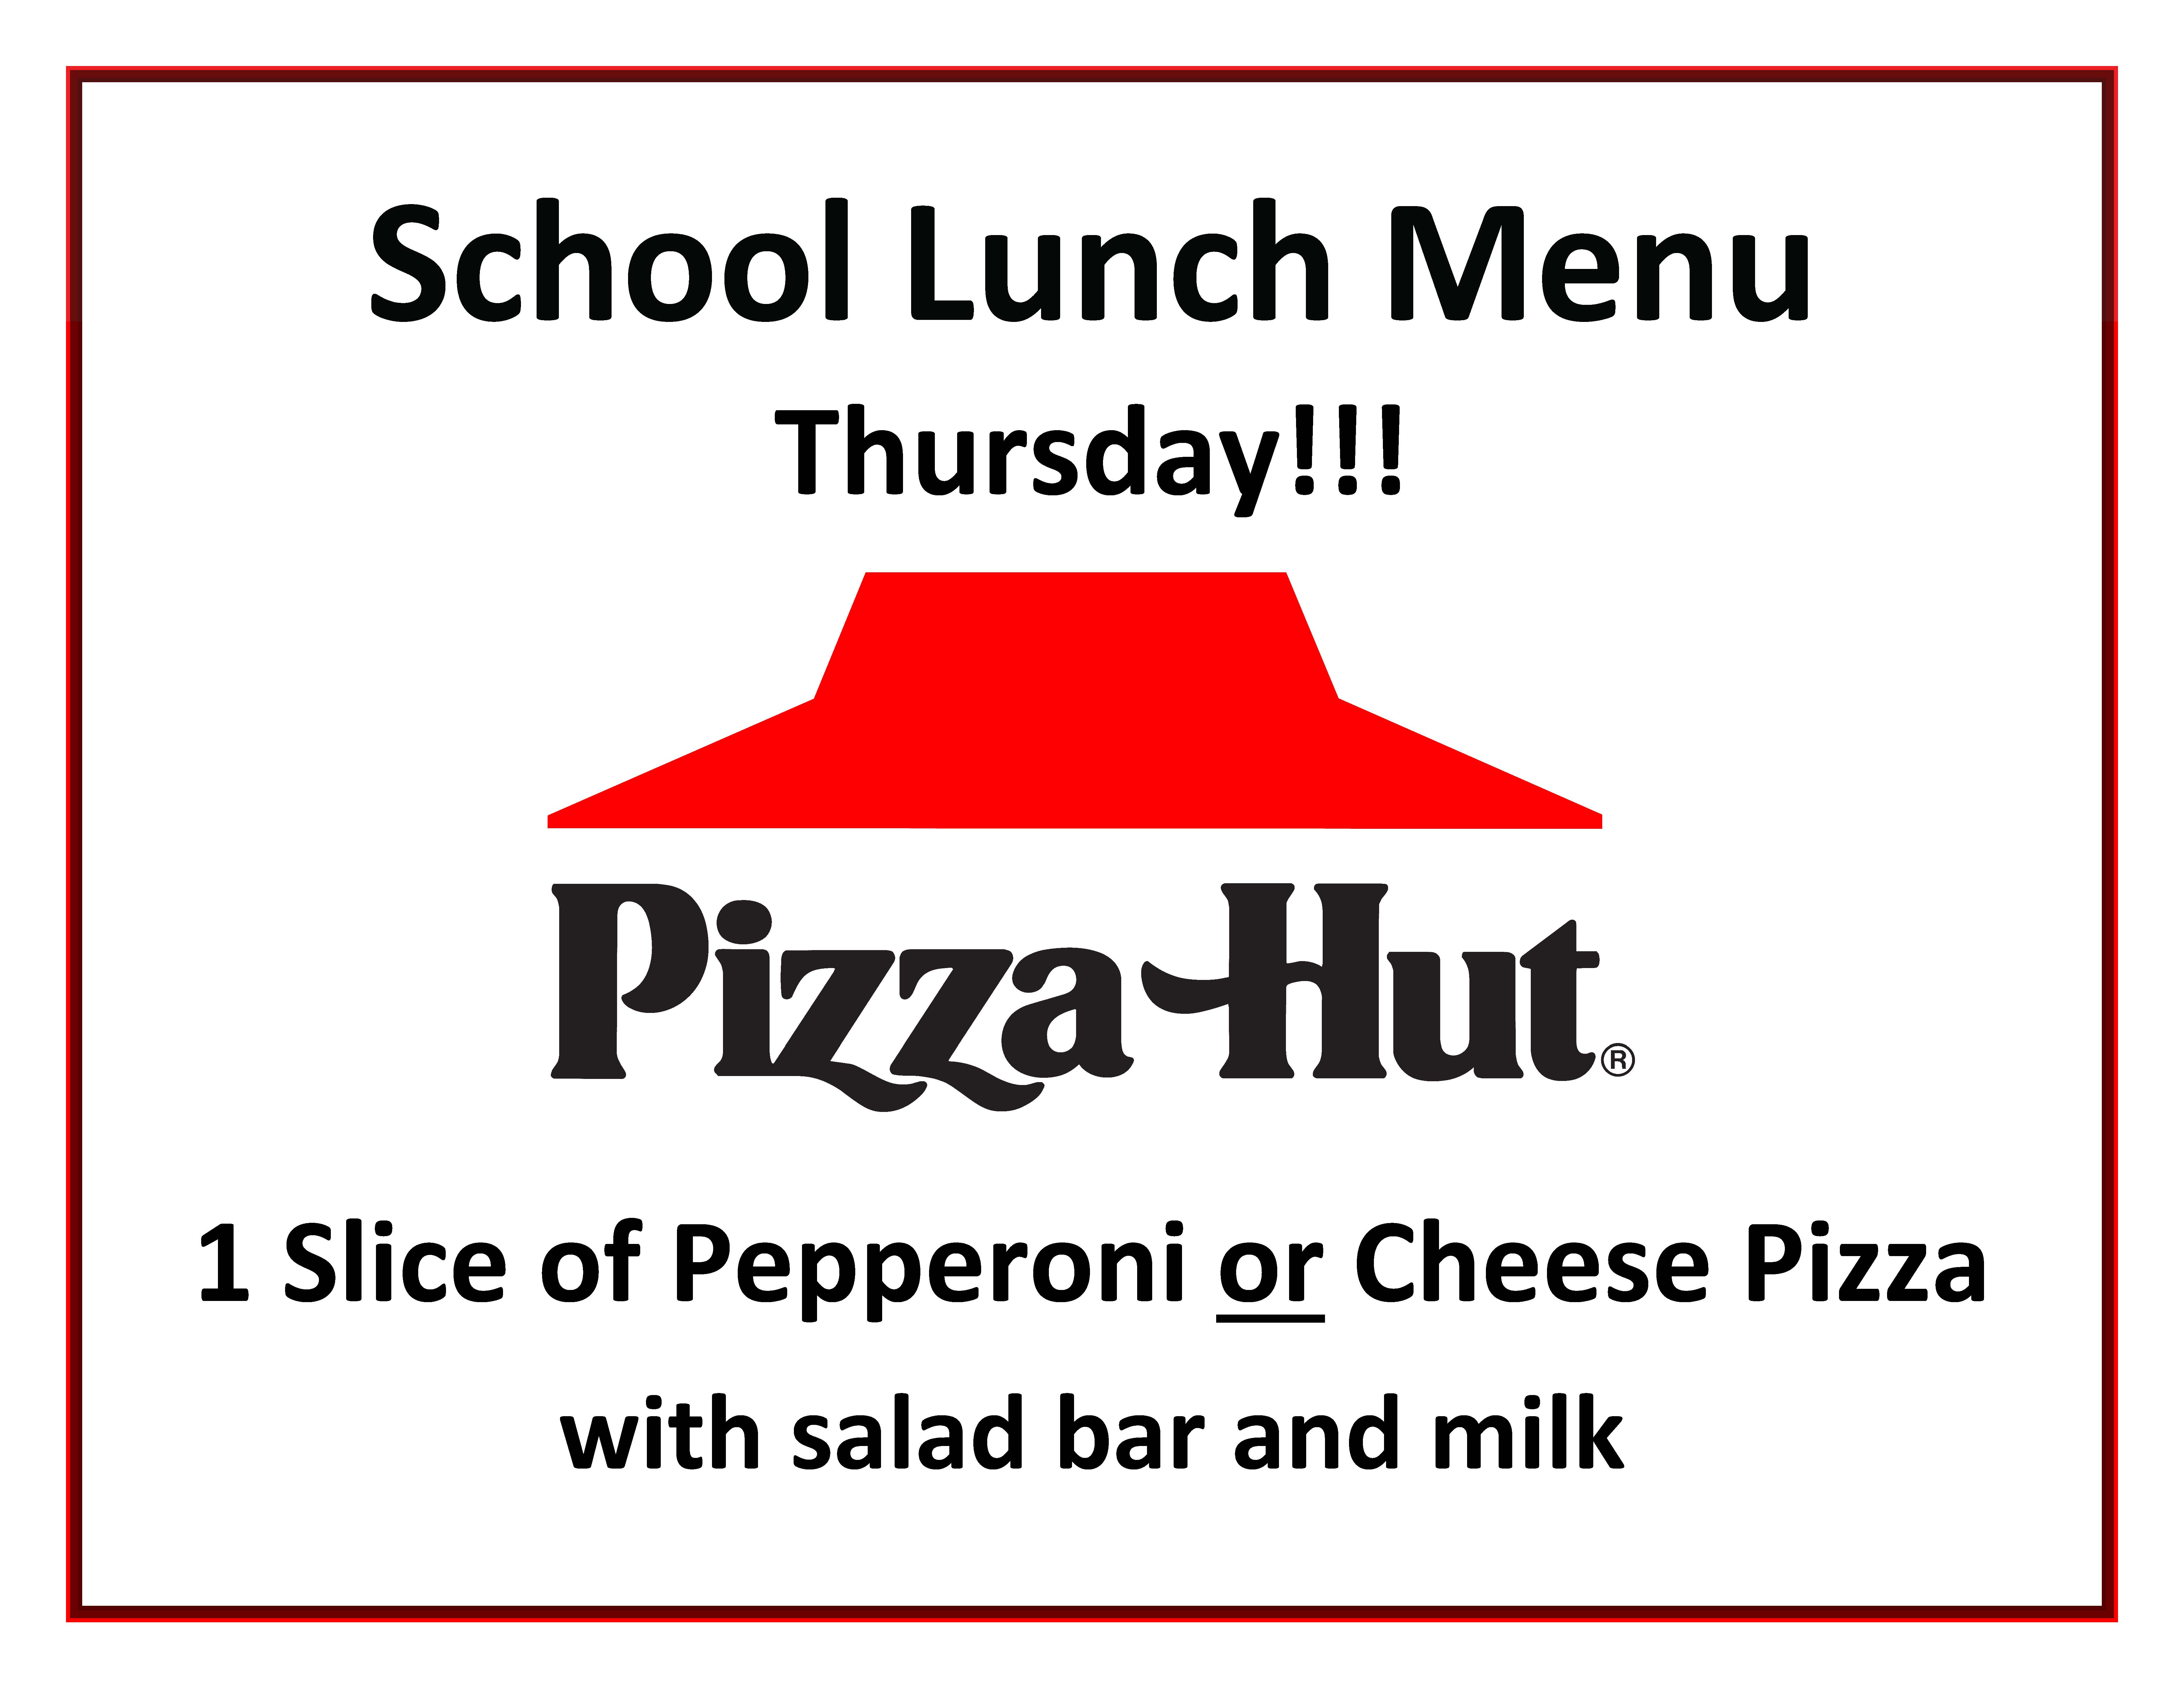 Pizza Hut Day in the school cafeteria - February 29